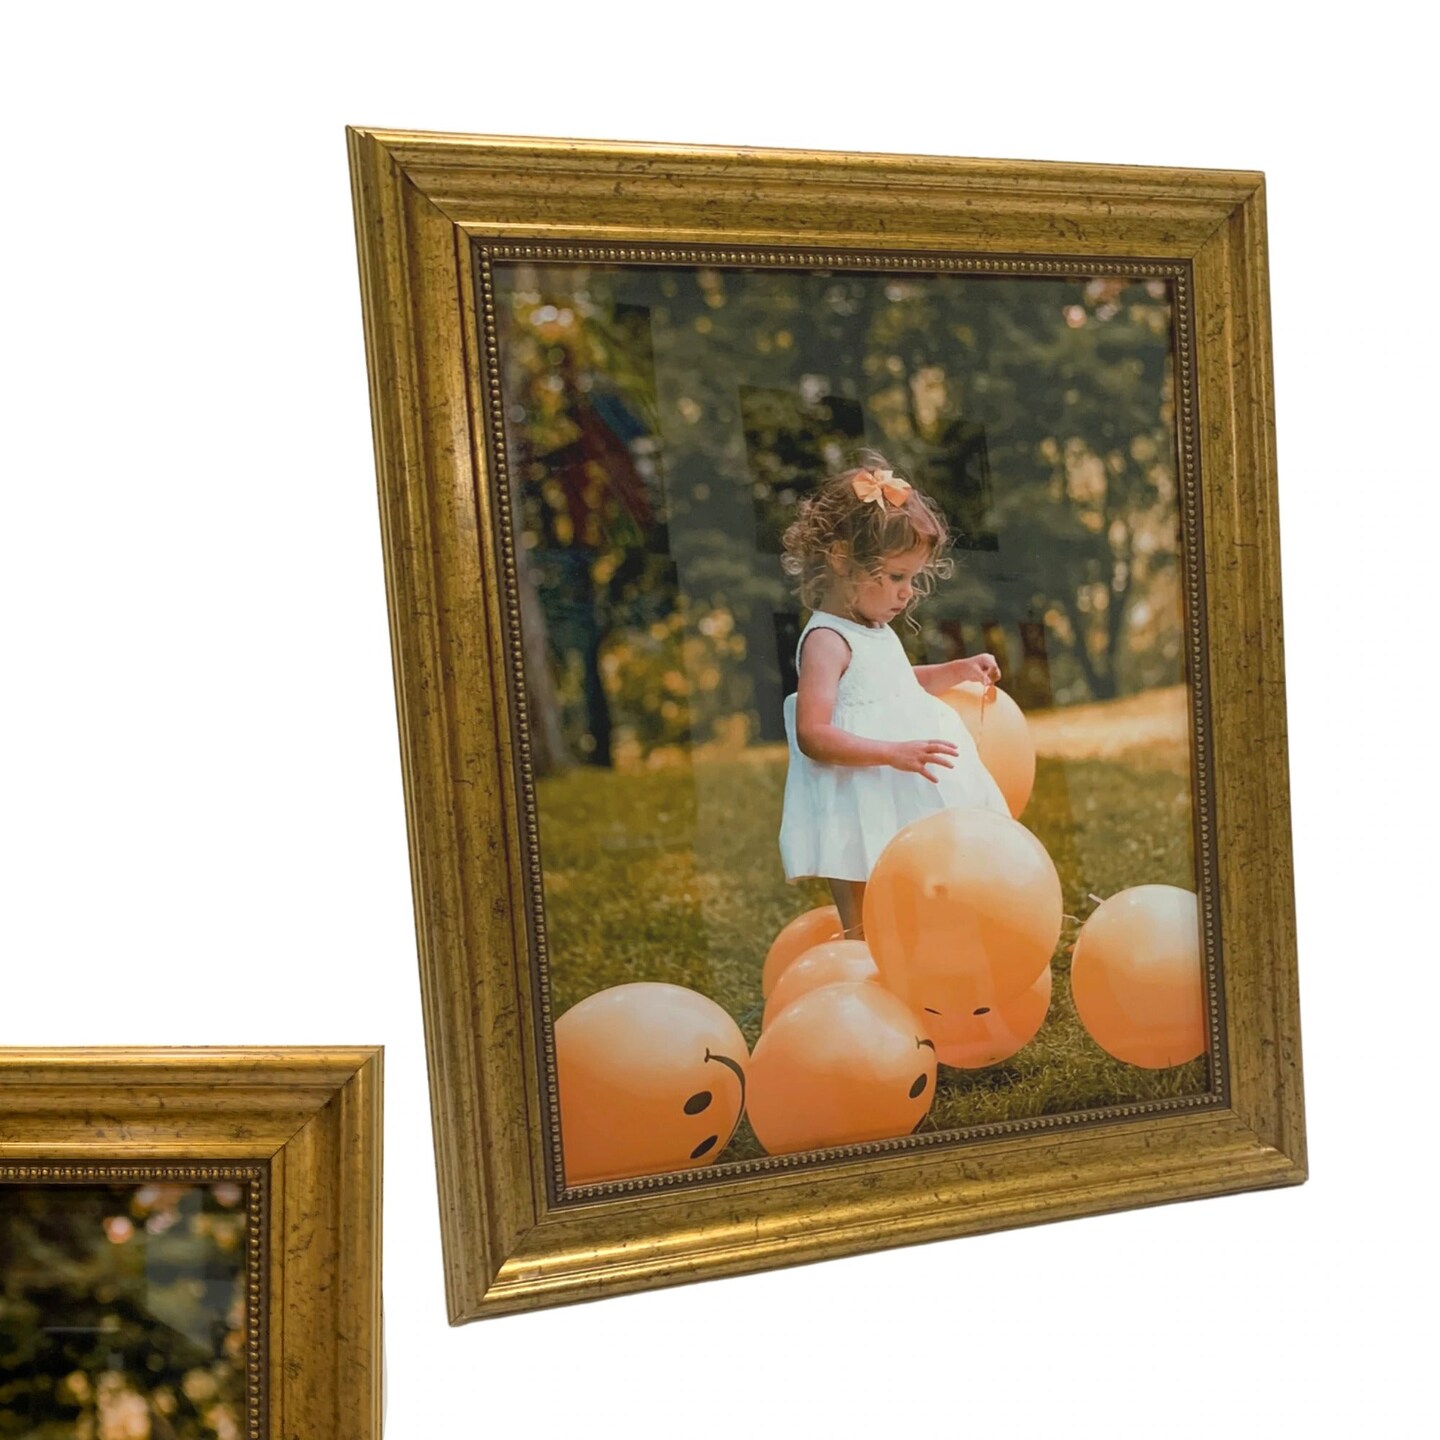 Gold 30x40 Picture Framess 30x40 Photo 30 x 40 Poster 30 x 40